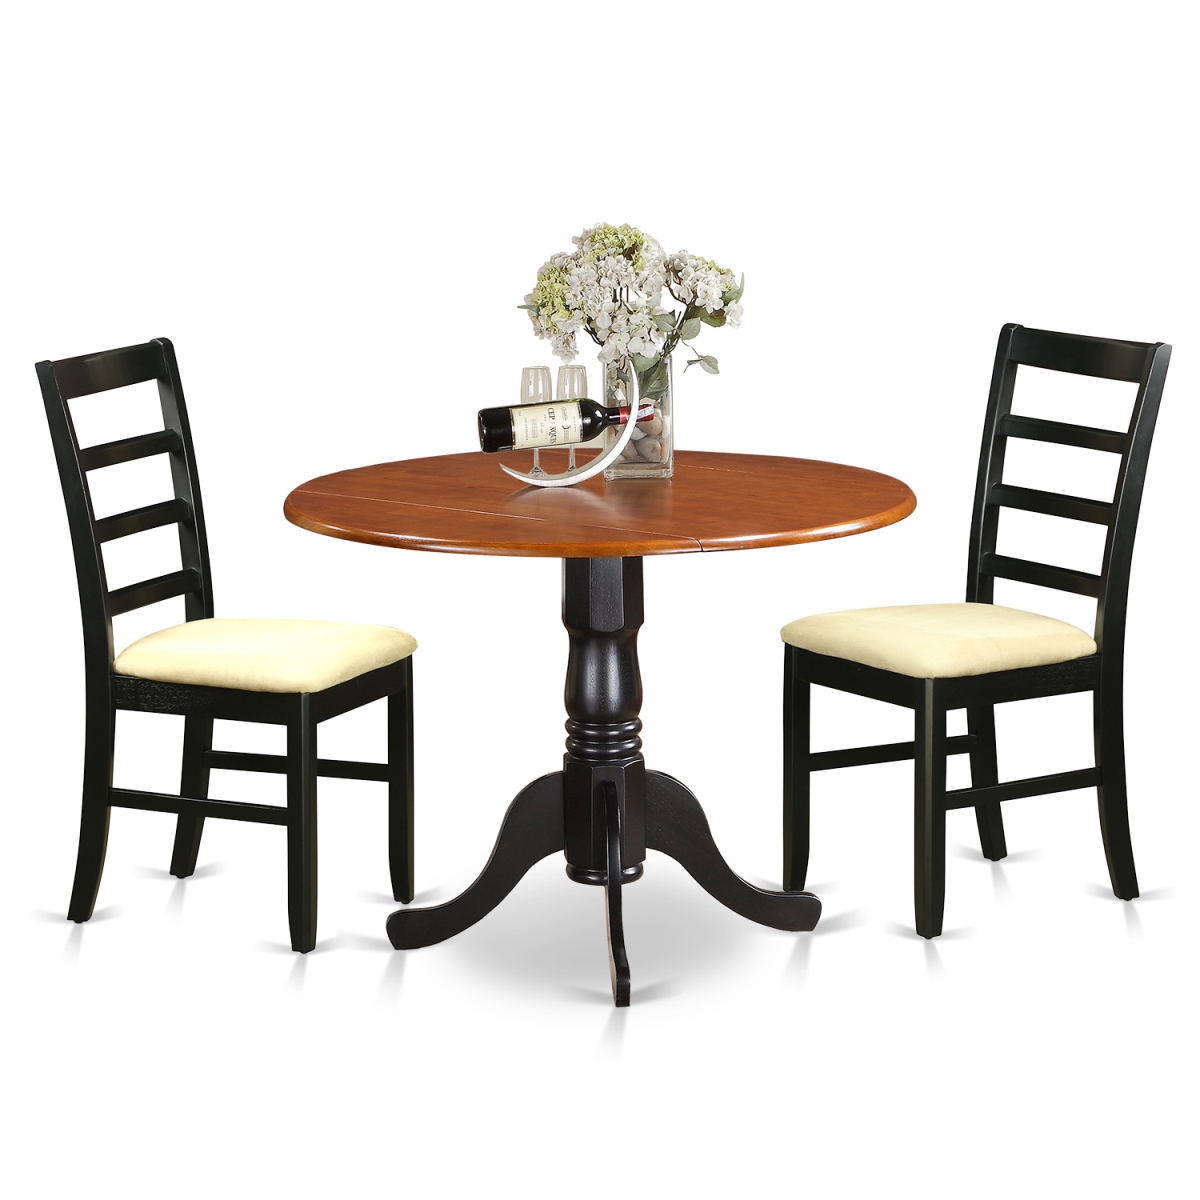 Picture of East West Furniture DLPF3-BCH-C Dublin Kitchen Table Set - Dining Table & 2 Microfiber Chairs, Black & Cherry - 3 Piece